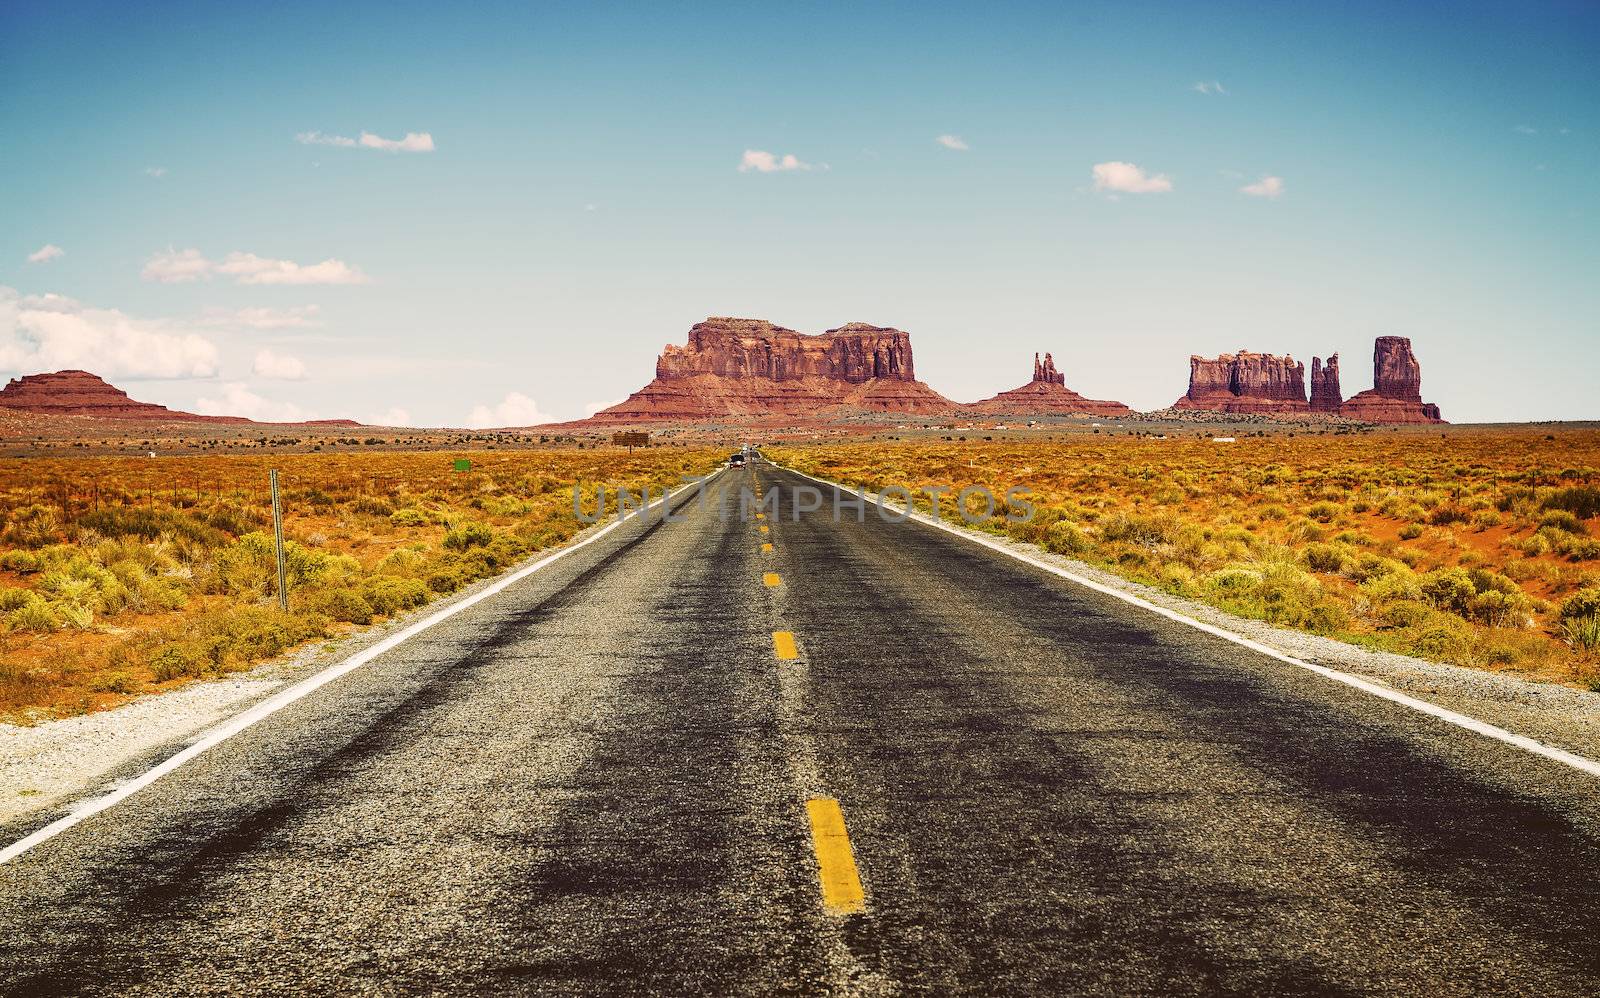 famous road in southwest of america near Monument Valley tribal park, USA